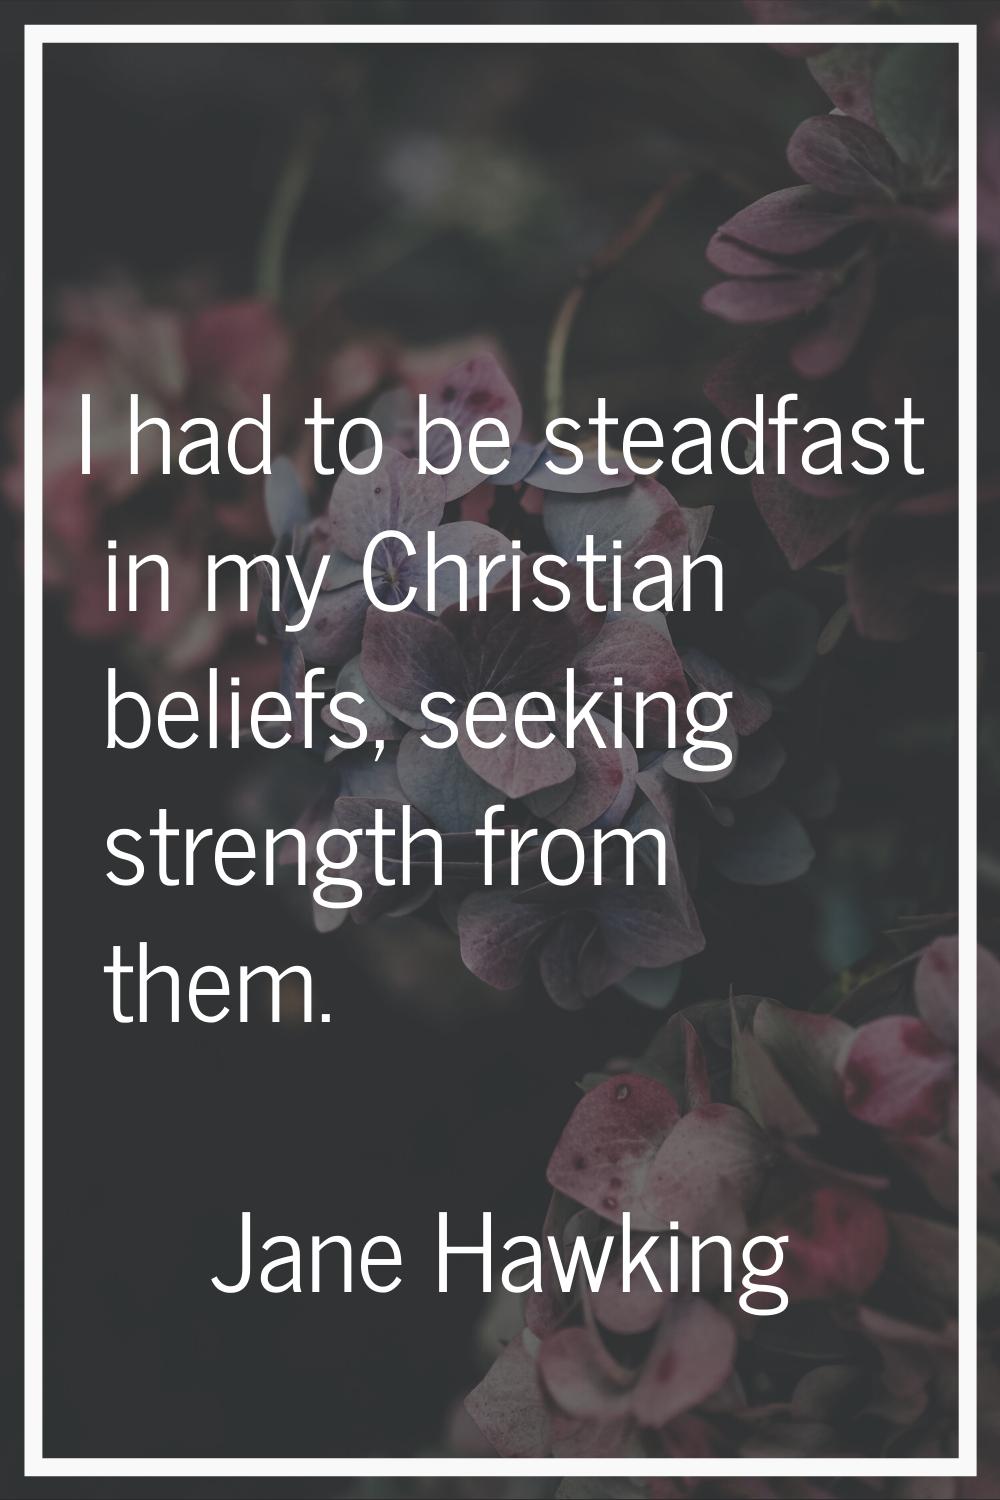 I had to be steadfast in my Christian beliefs, seeking strength from them.